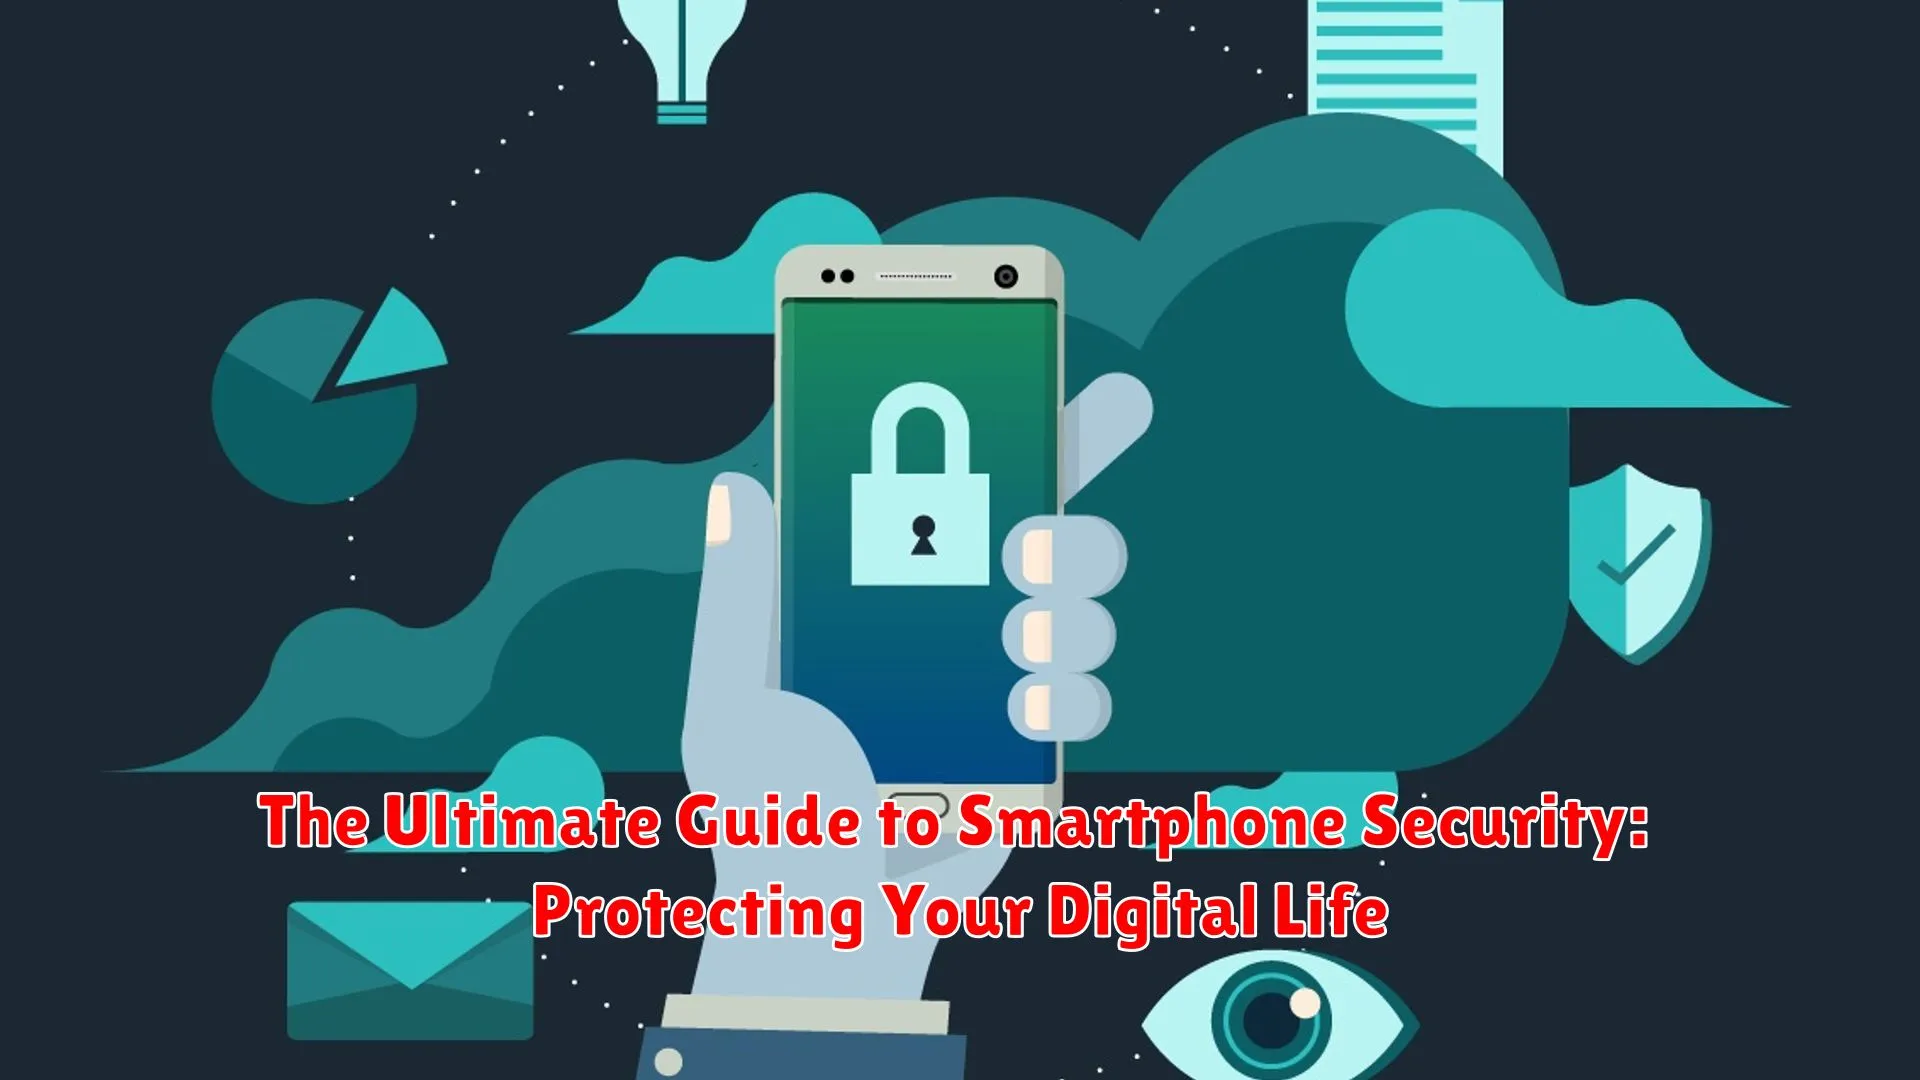 The Ultimate Guide to Smartphone Security: Protecting Your Digital Life